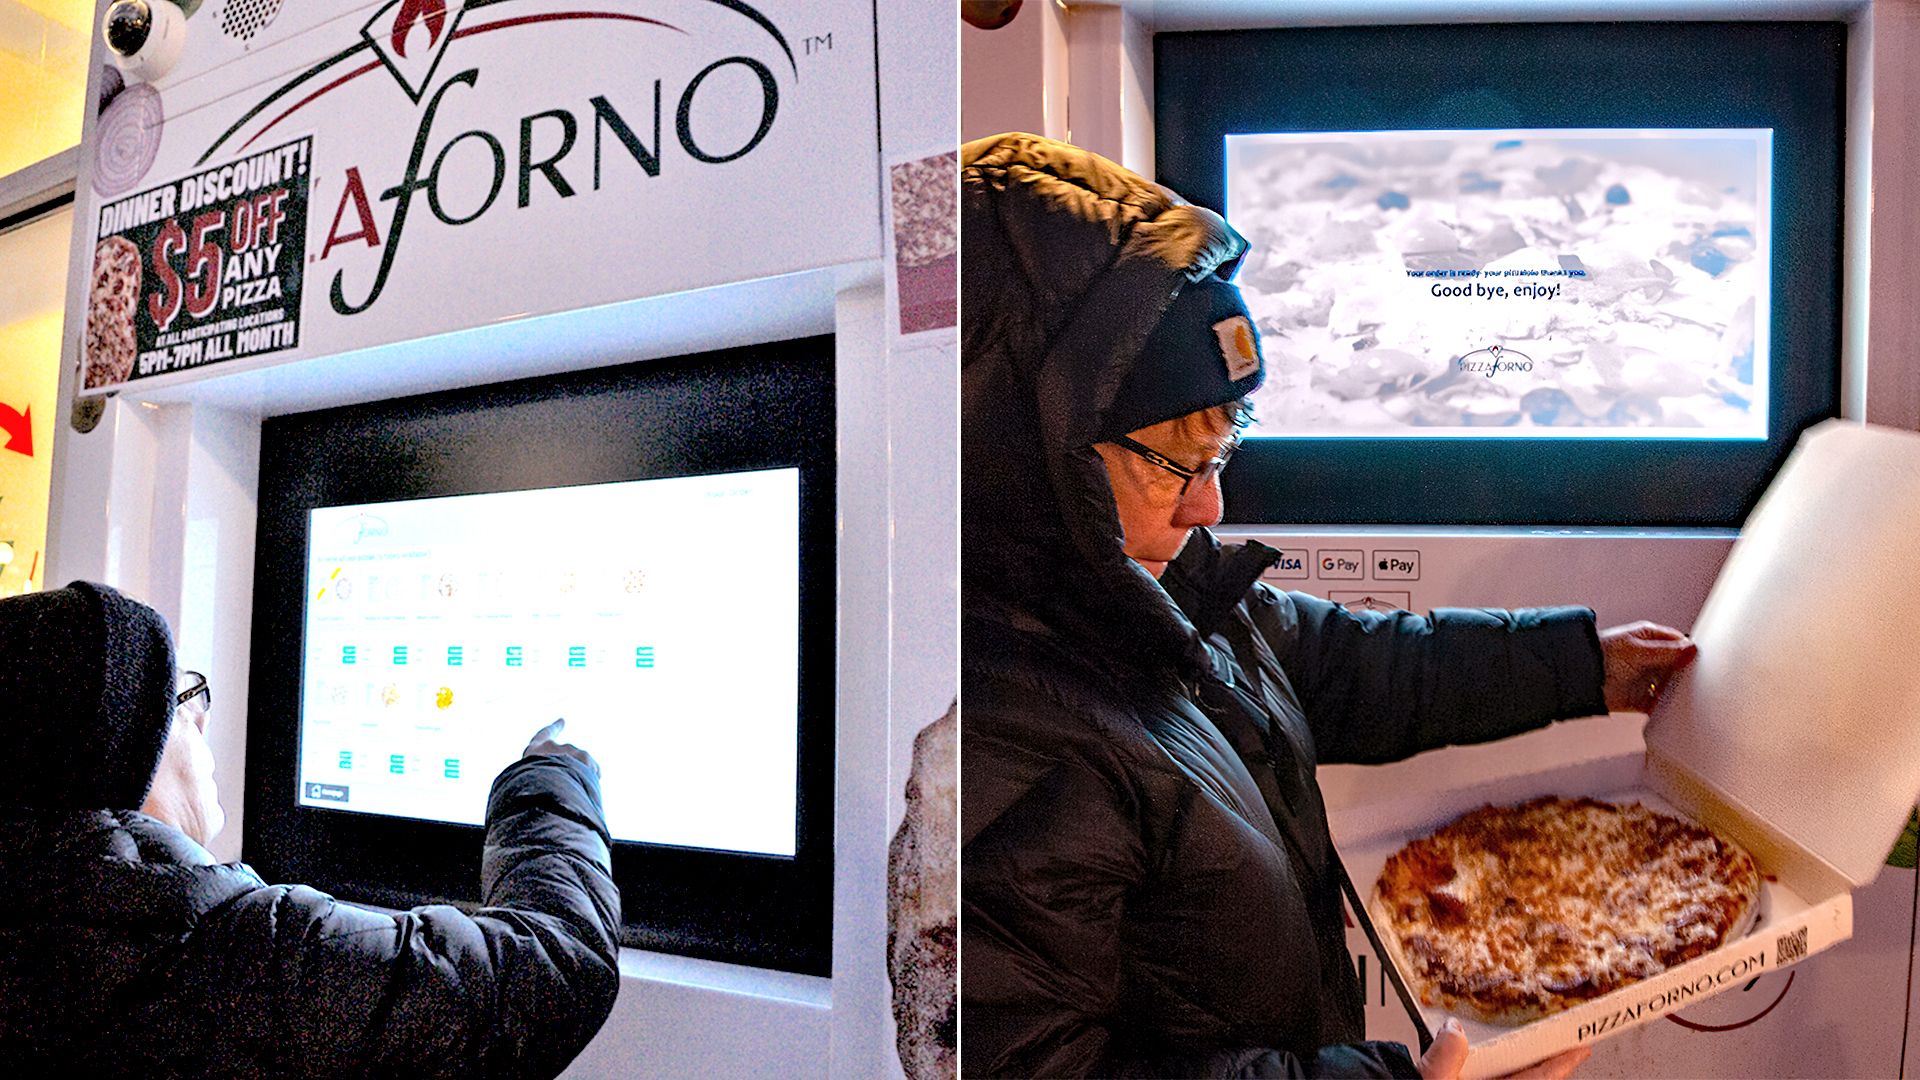 Joann Muller gets a pepperoni pizza from Pizza Forno's vending machine